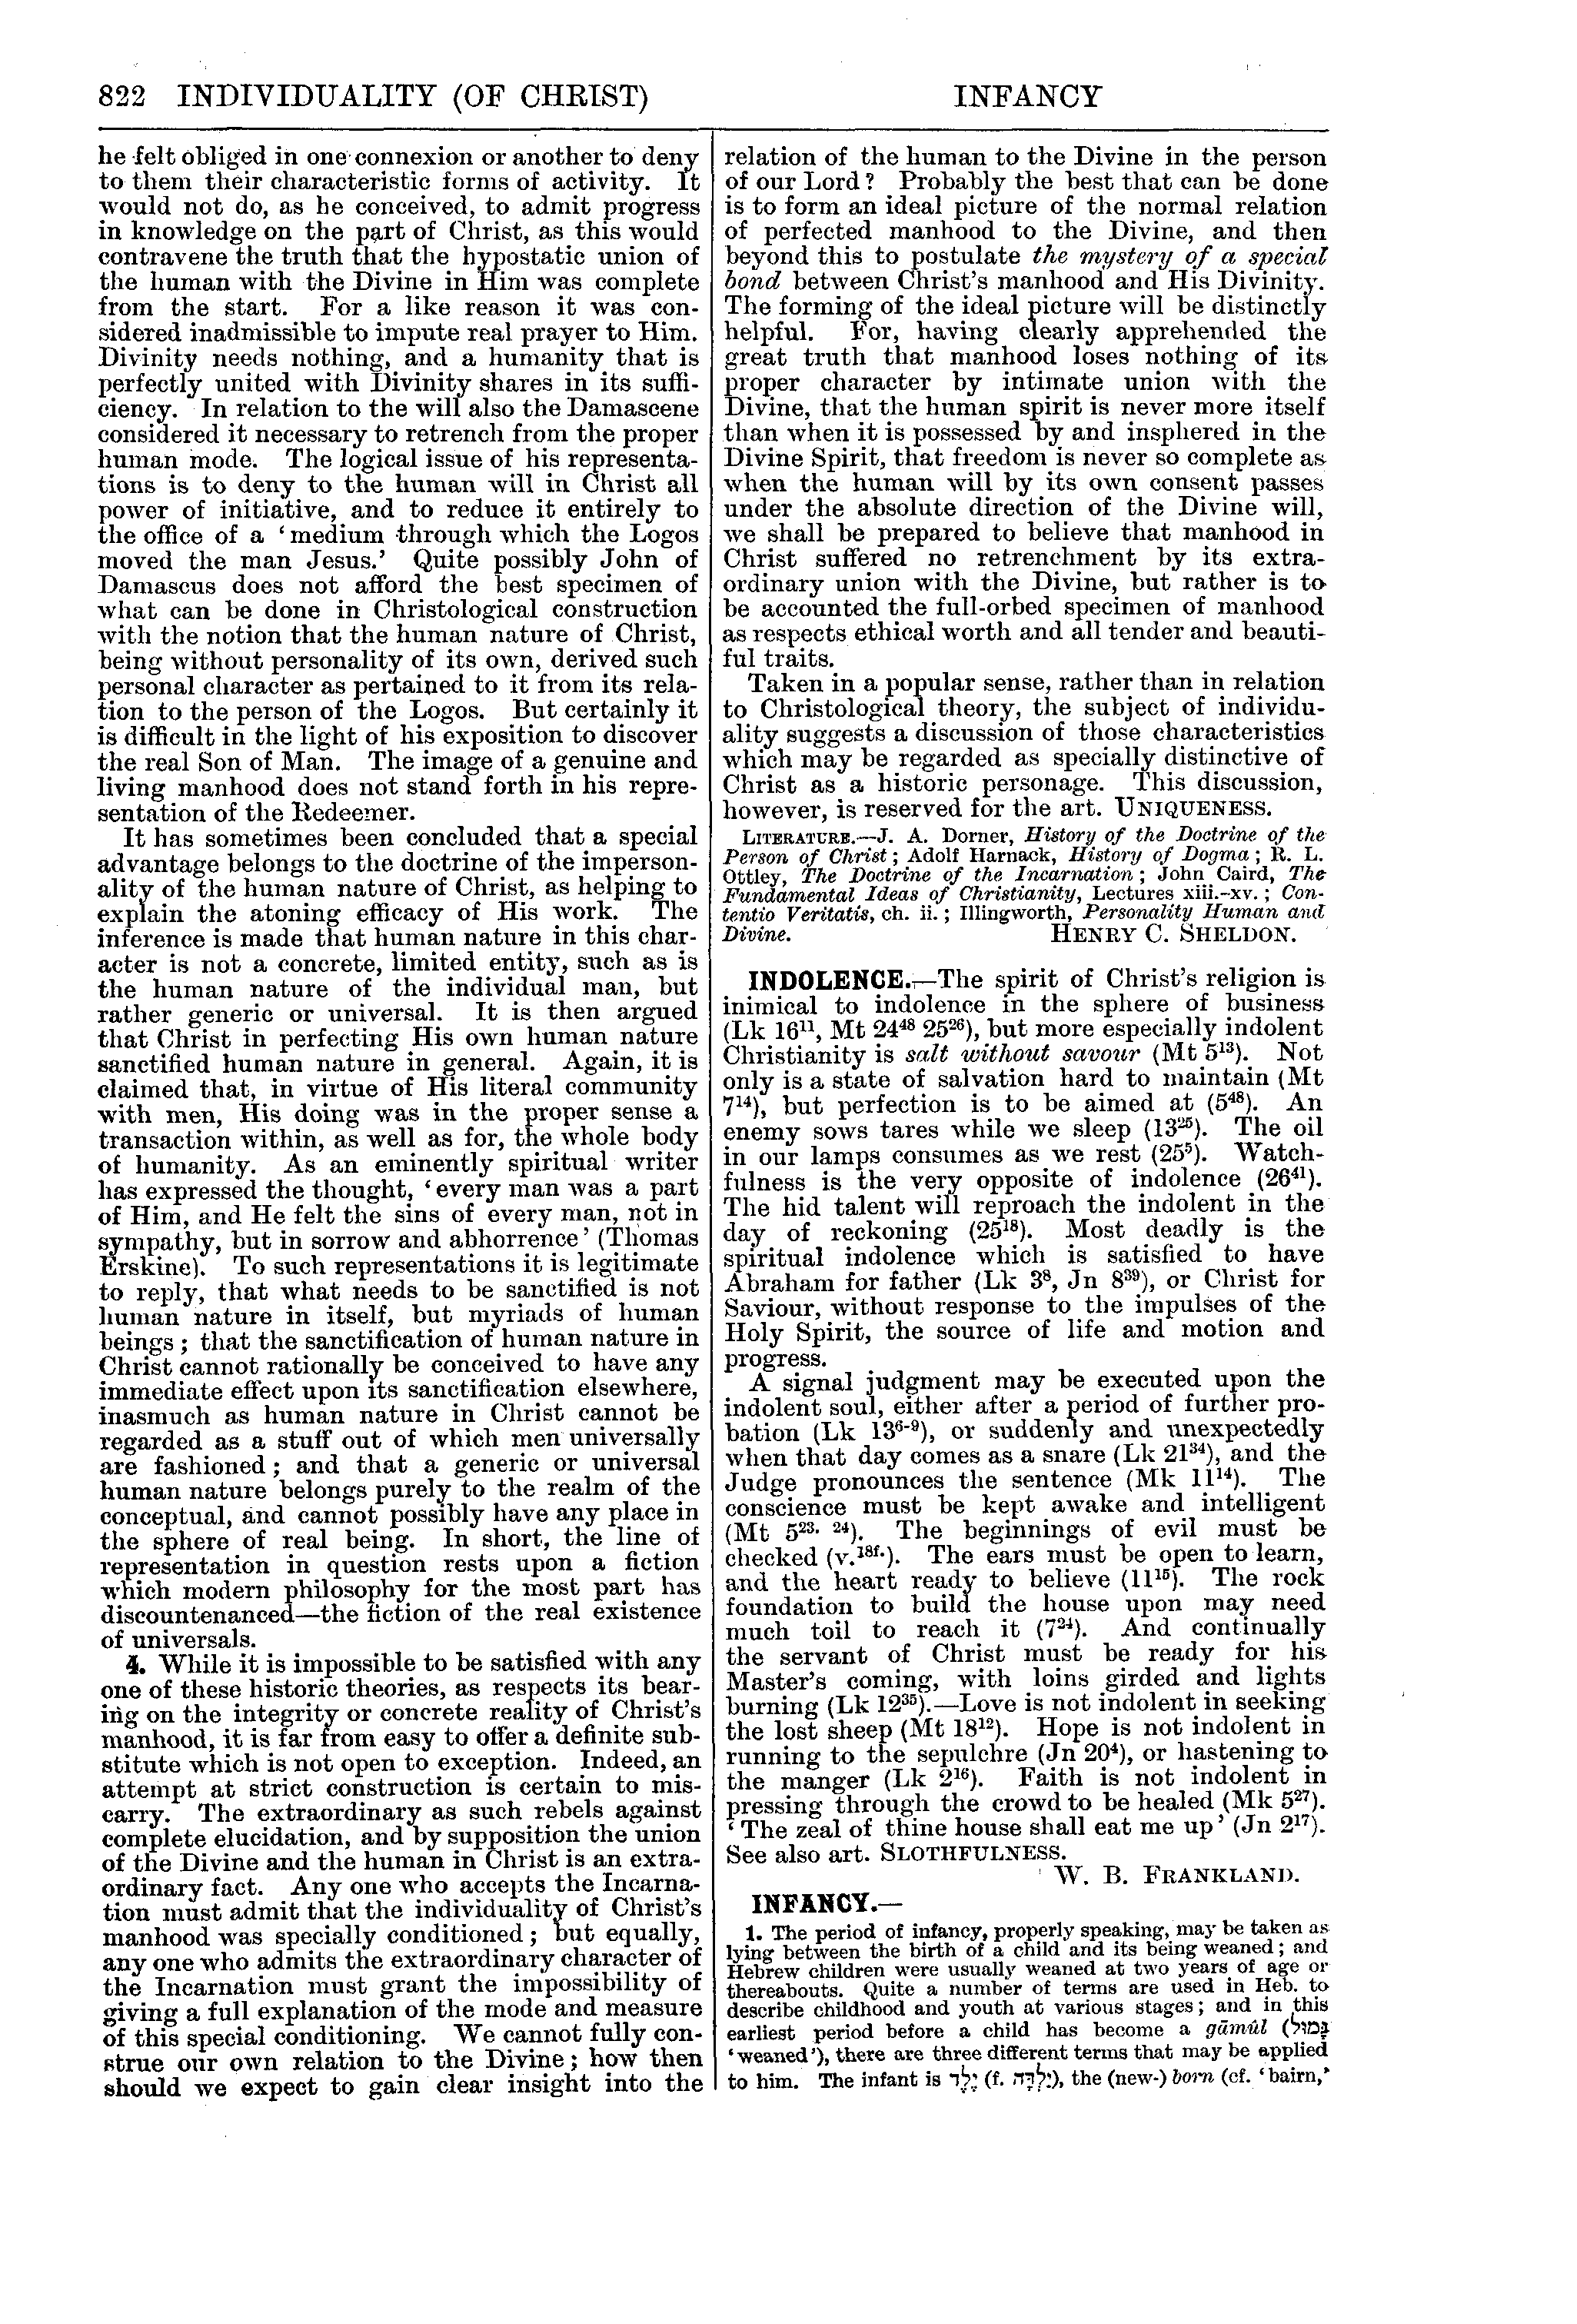 Image of page 822